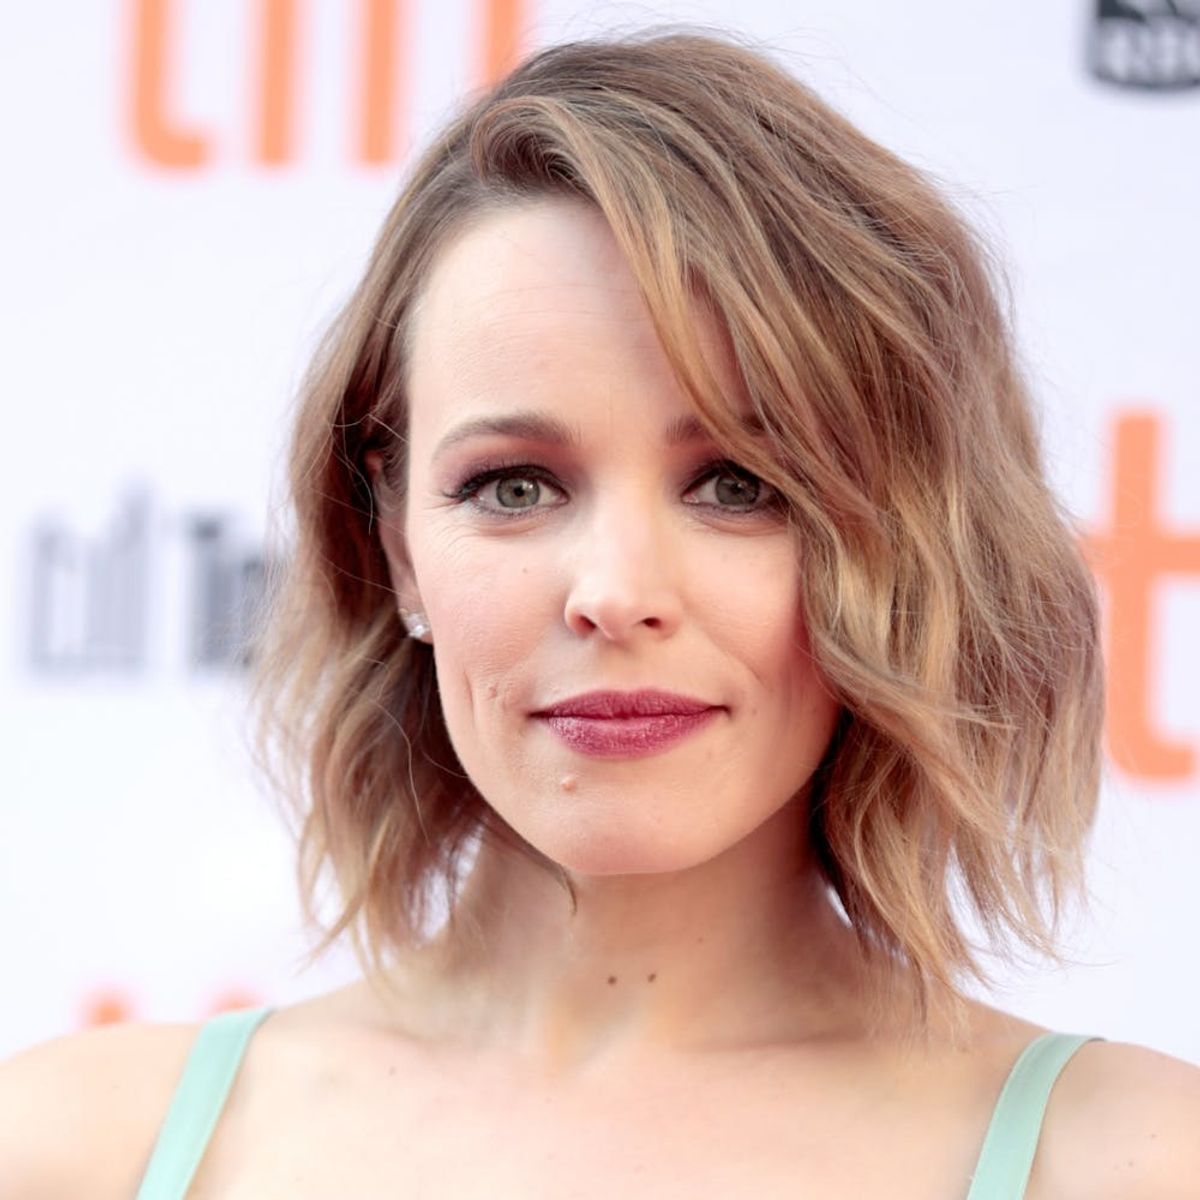 Here’s How Rachel McAdams *Really* Feels About Her Infamous ‘Mean Girls’ Character Regina George